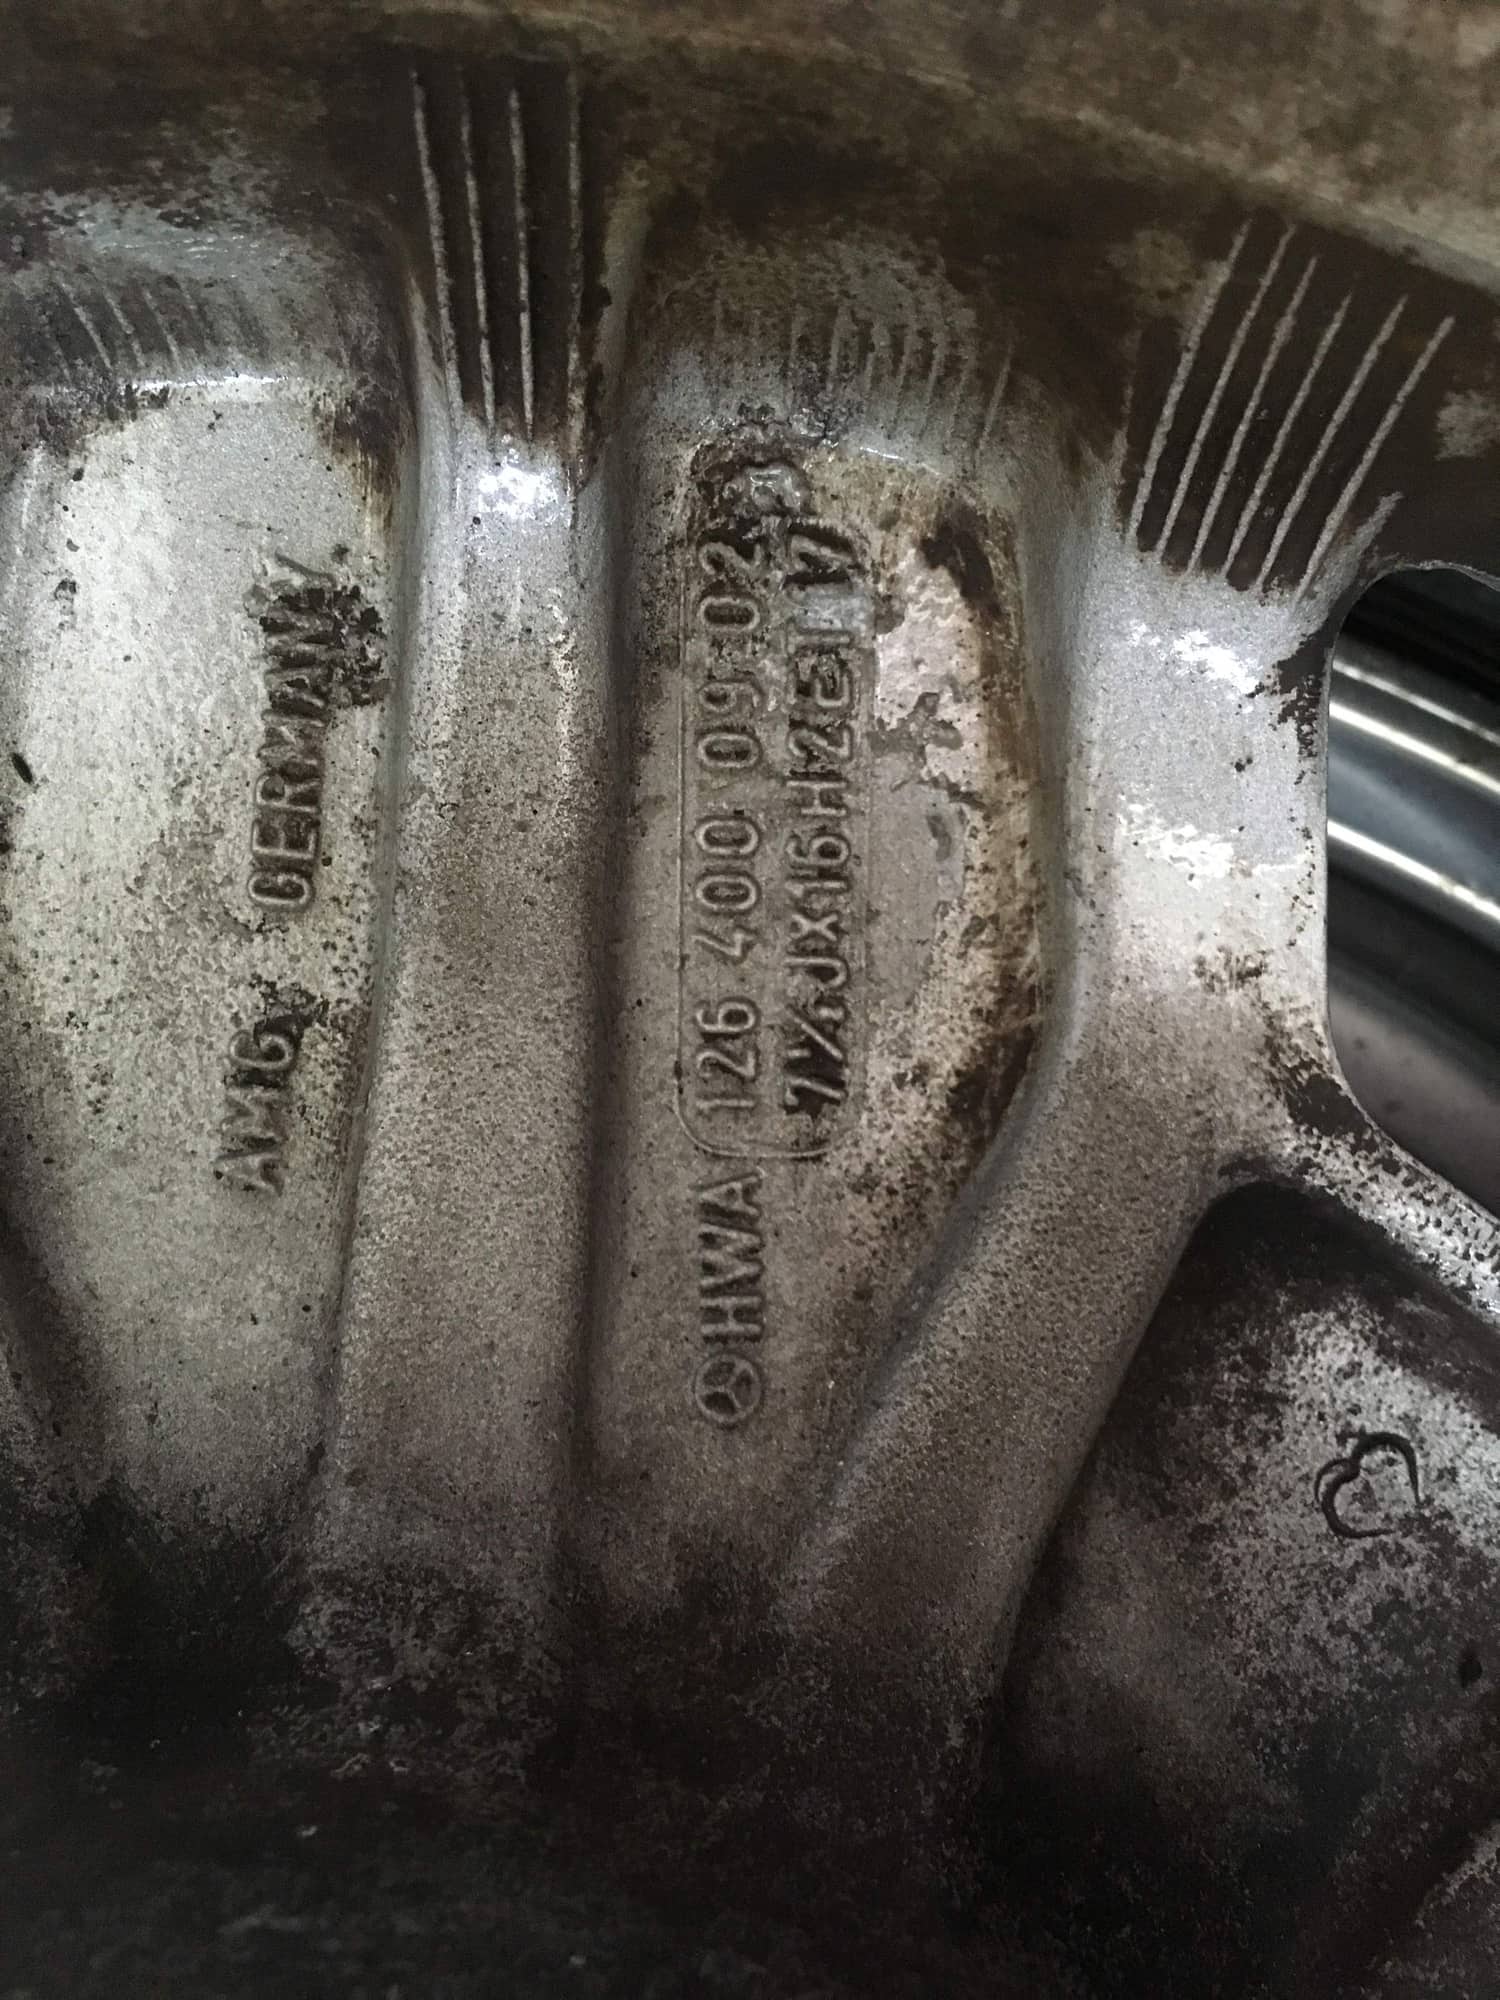 Wheels and Tires/Axles - FS: Vintage AMG Monoblocks  aka "Hammer wheels" set of 4 with near new Conti Extremes - Used - 1982 to 1991 Mercedes-Benz 560SEC - Edmonds, WA 98026, United States